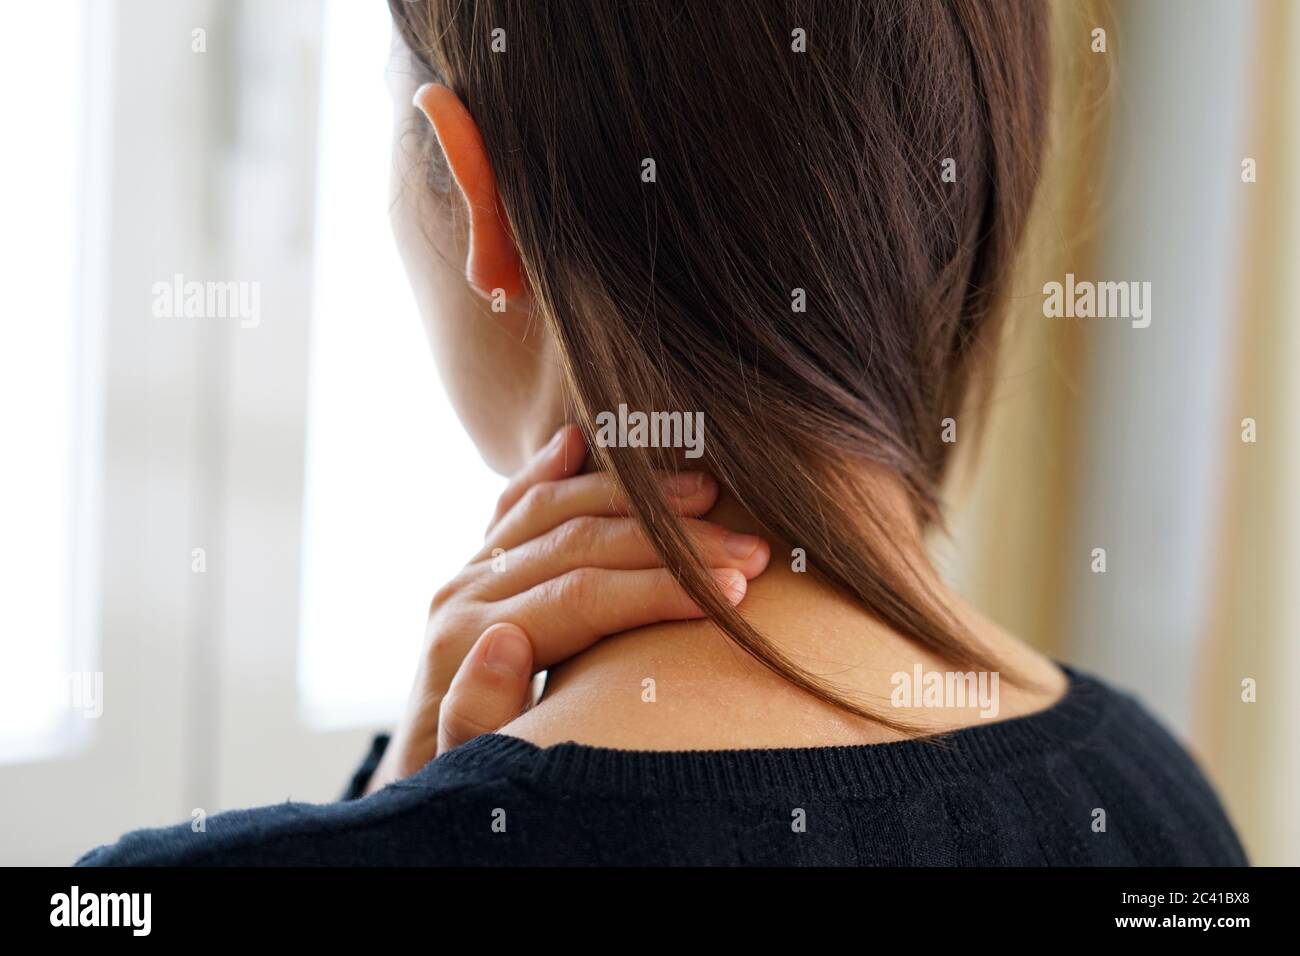 Woman with neck pain touching her neck. Neck pain concept. Stock Photo